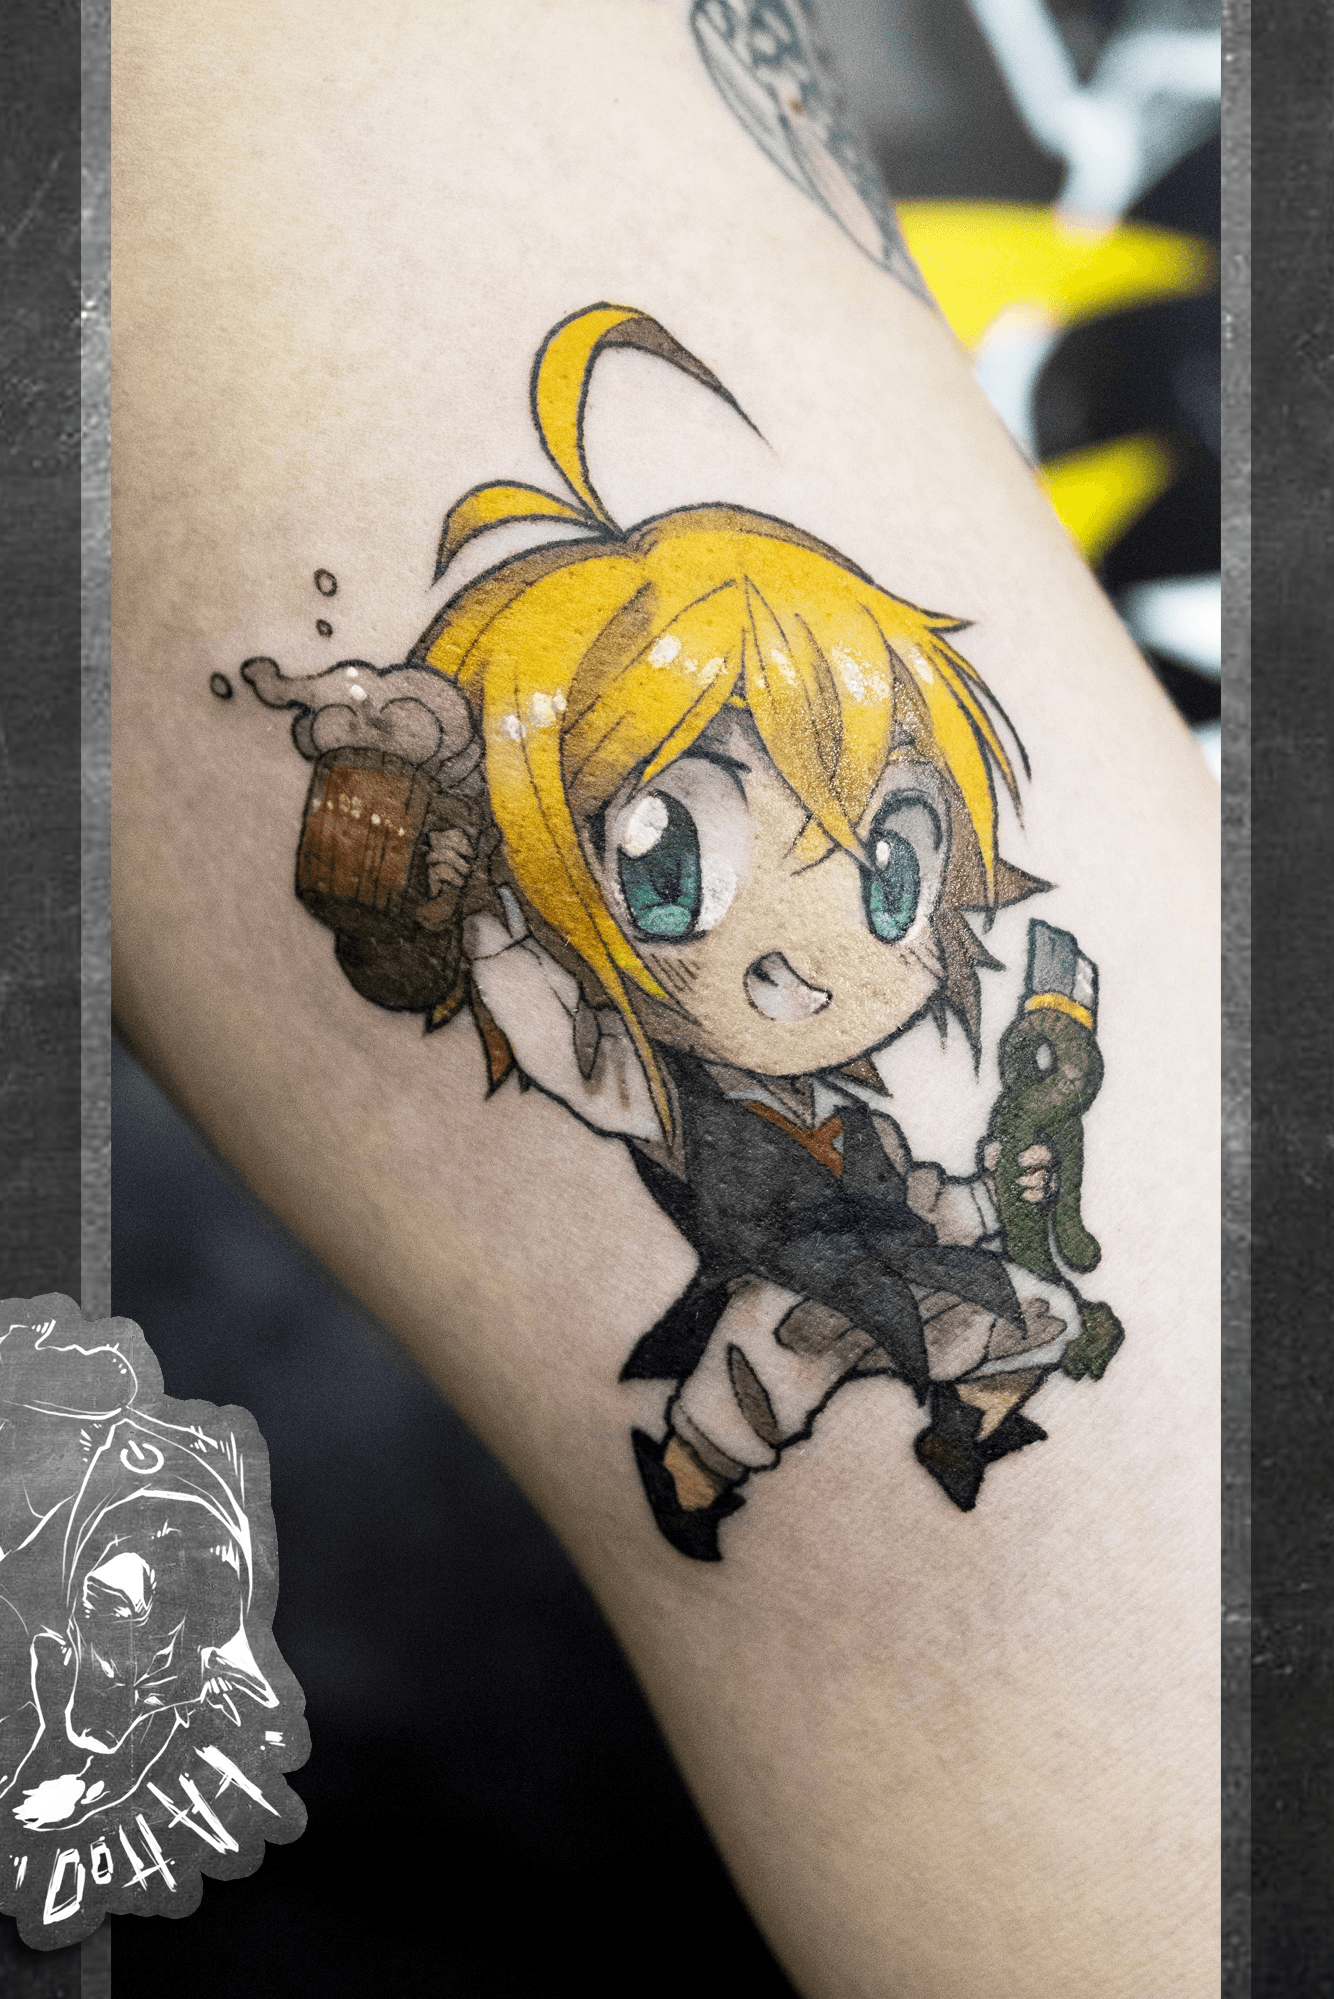 Perseverance Tattoo  Seven Deadly Sins  Meliodas tattoo done by Jordan  ThedevilinyourbloodstreamInstagramcomthedevilinyourbloodstream Bring  me more anime these are so fun to do Call 3523411643 or message me here  to schedule 